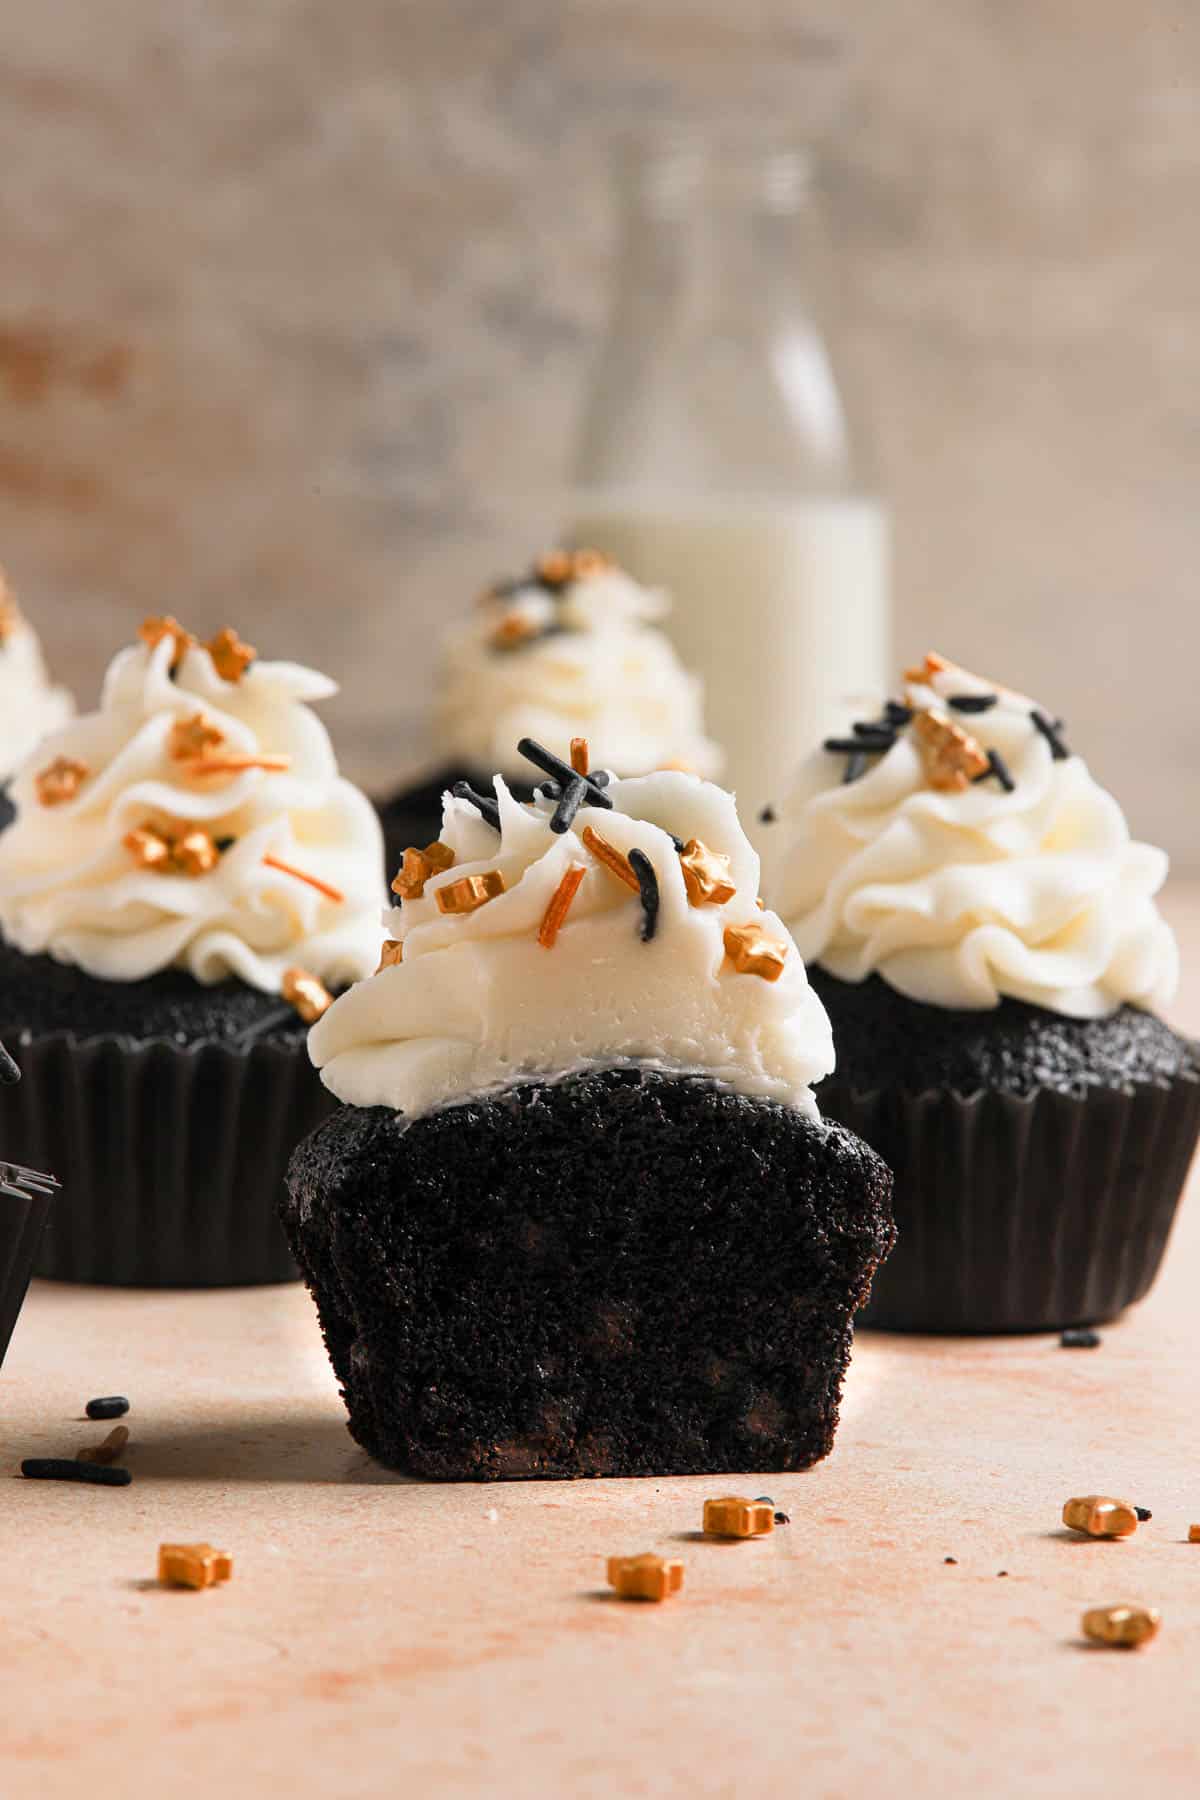 A close-up image of a black cocoa cupcake with a bite taken out of it shows the soft, tender, moist cupcake with chocolate chips baked throughout.